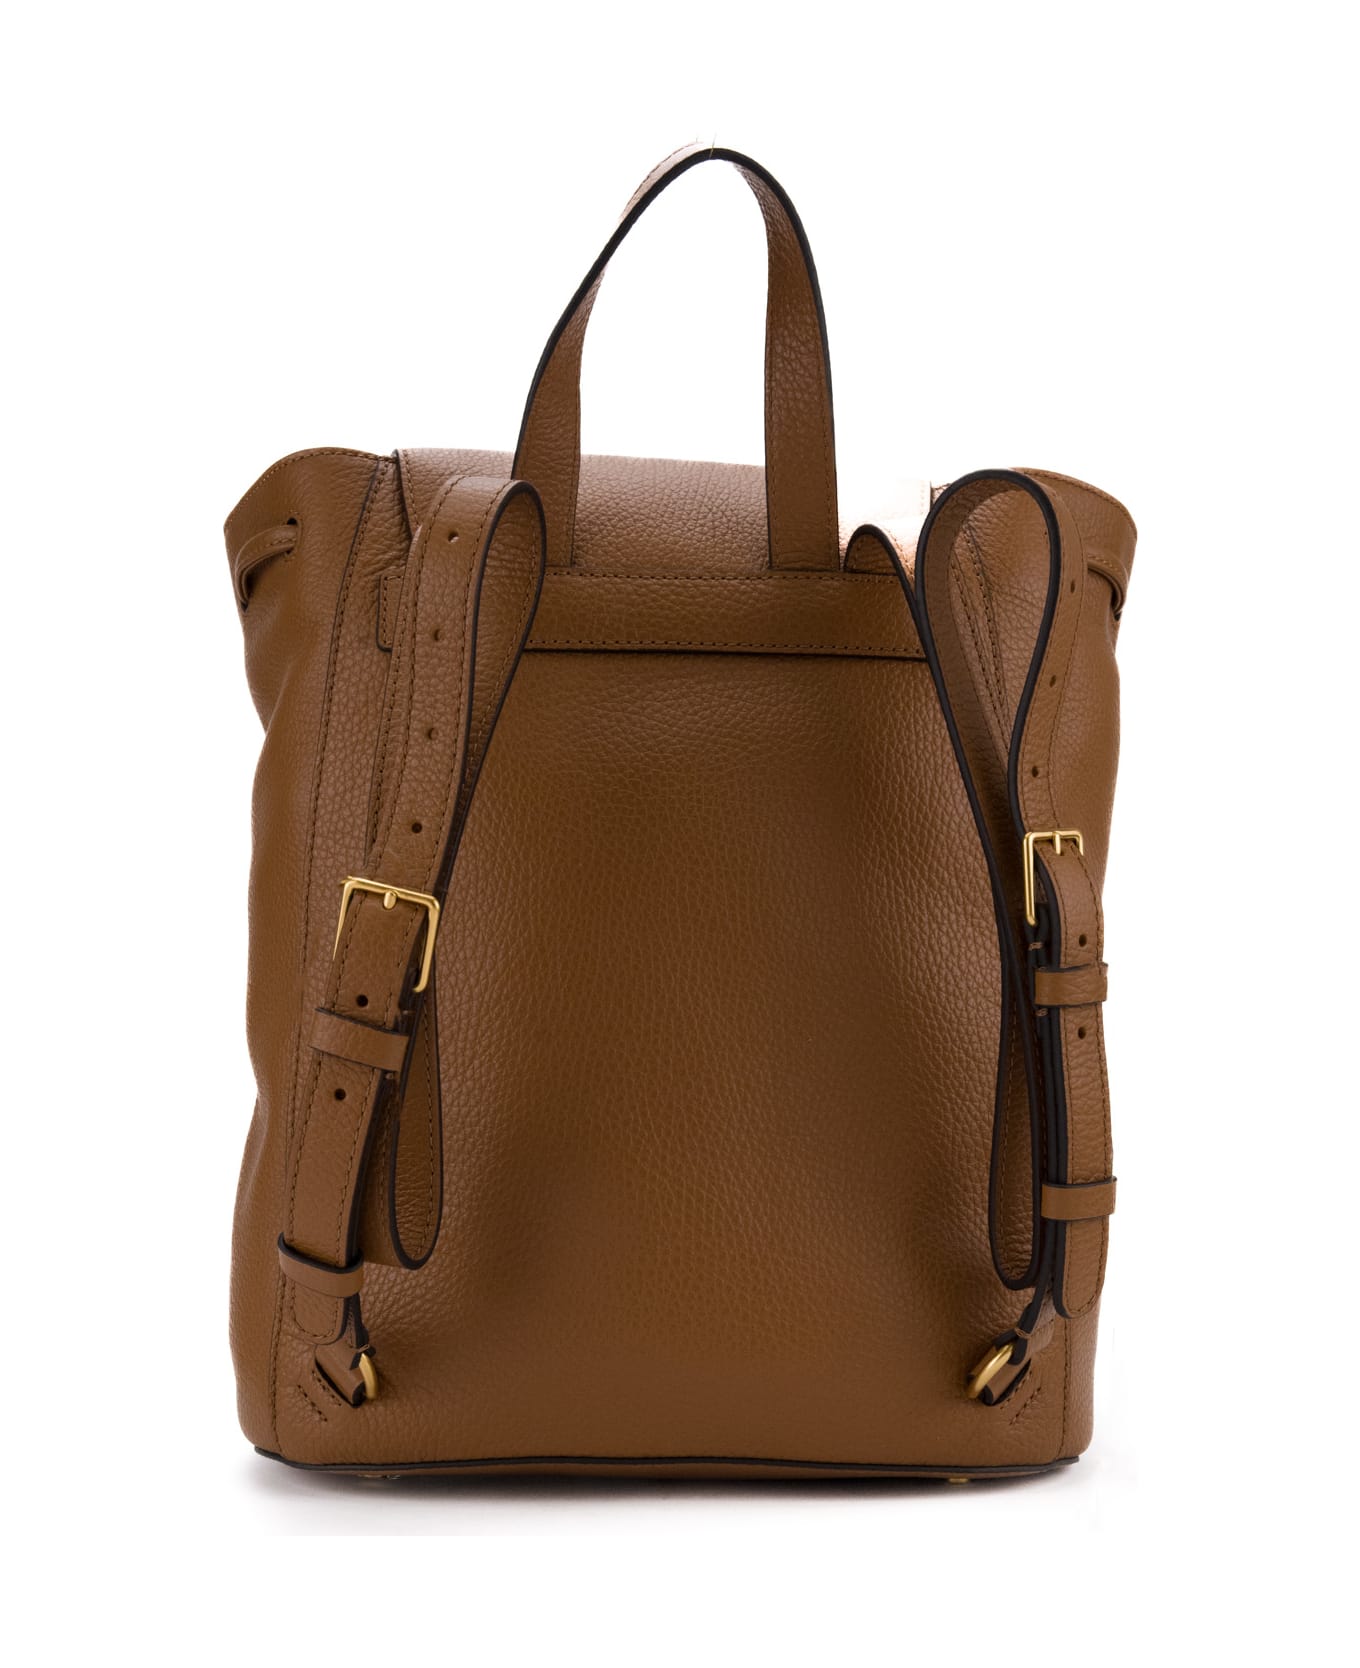 Coccinelle Beat Soft Brown Backpack - Cuir バックパック